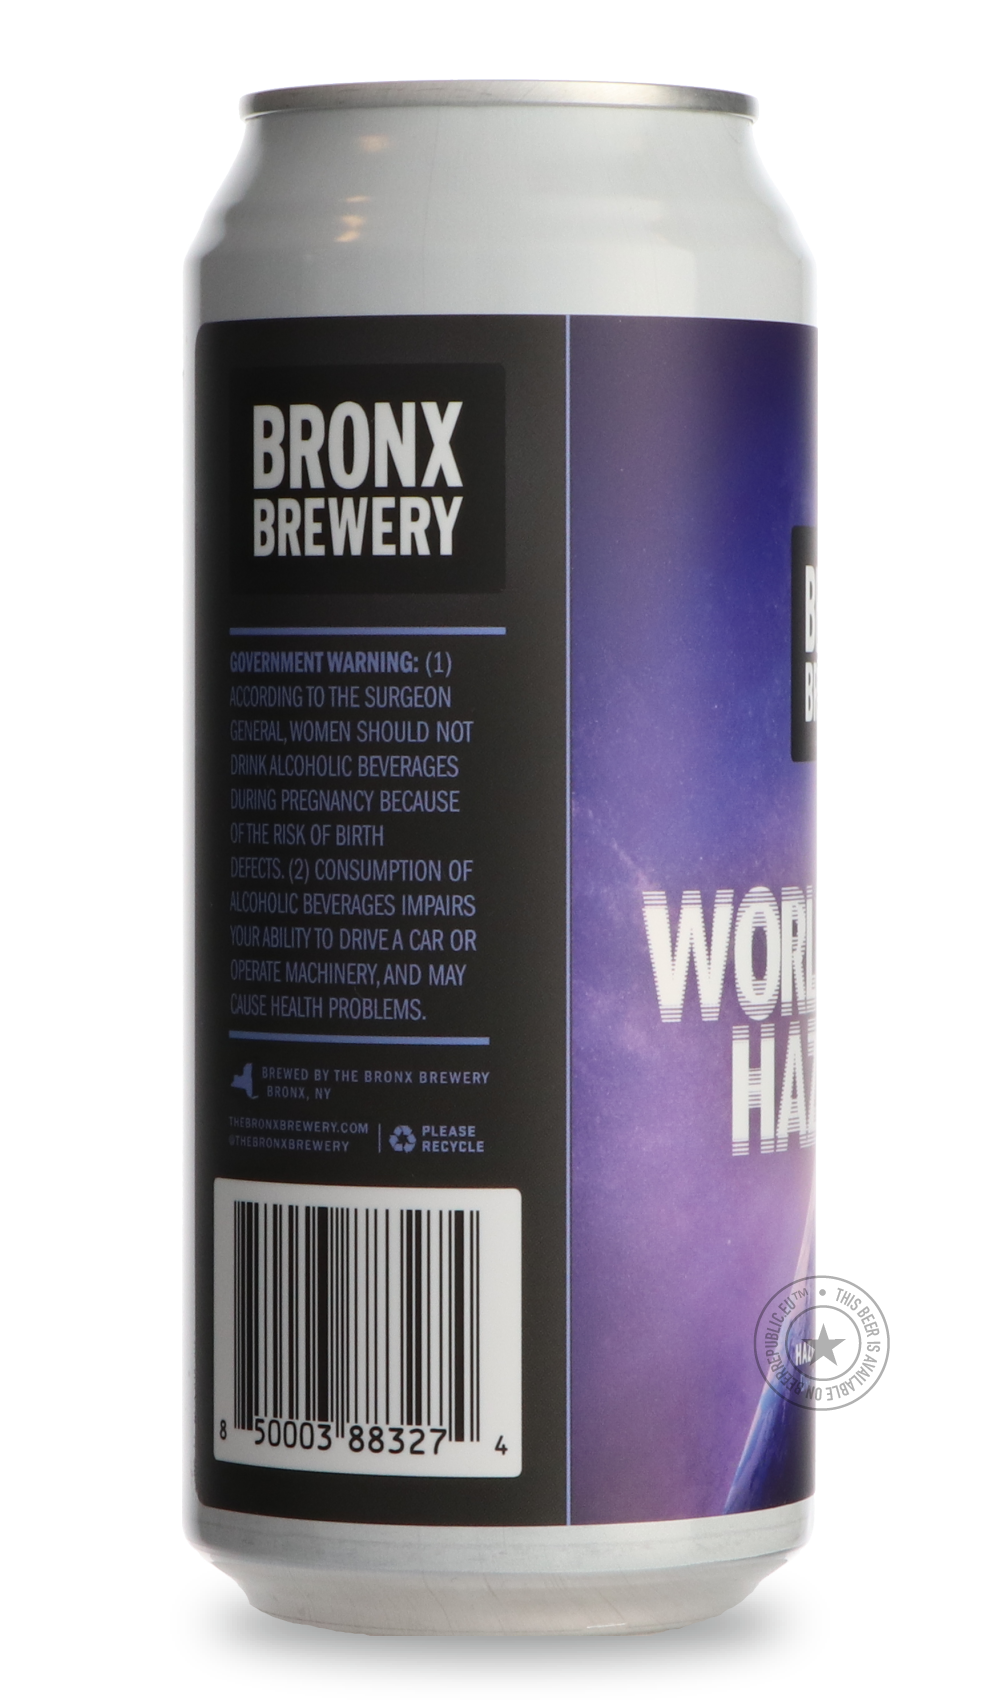 -Bronx- World Gone Hazy-IPA- Only @ Beer Republic - The best online beer store for American & Canadian craft beer - Buy beer online from the USA and Canada - Bier online kopen - Amerikaans bier kopen - Craft beer store - Craft beer kopen - Amerikanisch bier kaufen - Bier online kaufen - Acheter biere online - IPA - Stout - Porter - New England IPA - Hazy IPA - Imperial Stout - Barrel Aged - Barrel Aged Imperial Stout - Brown - Dark beer - Blond - Blonde - Pilsner - Lager - Wheat - Weizen - Amber - Barley Wi